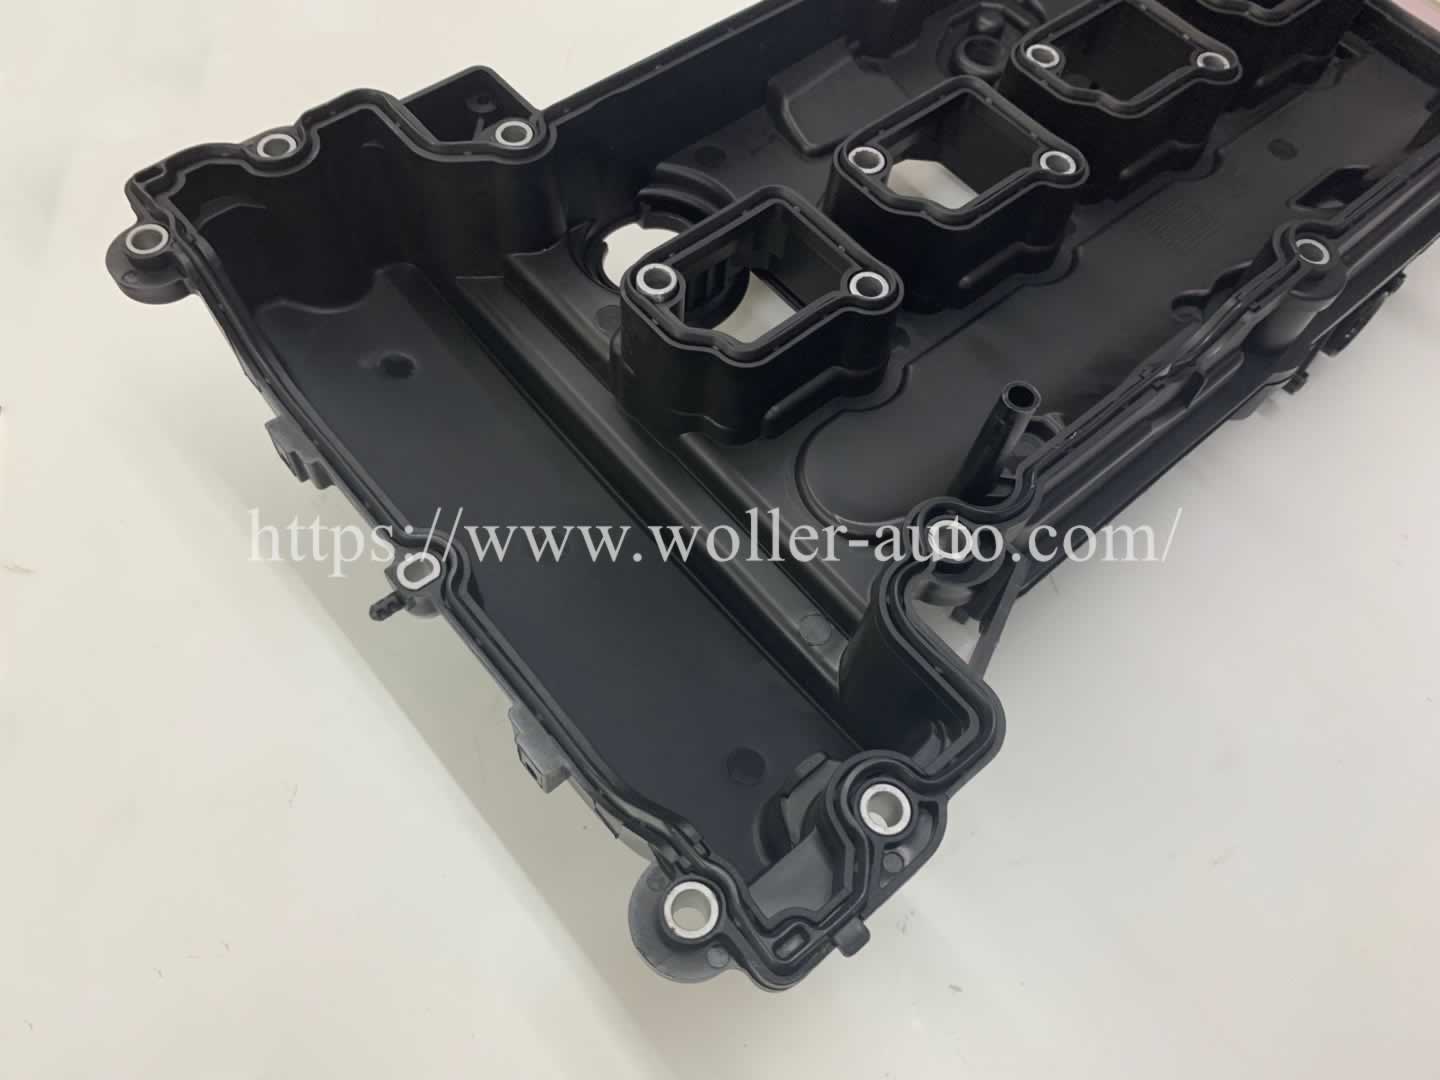 OE 2710101730 For MERCEDES BENZ 2012-2015 C250 Engine Valve Cover A2710101730